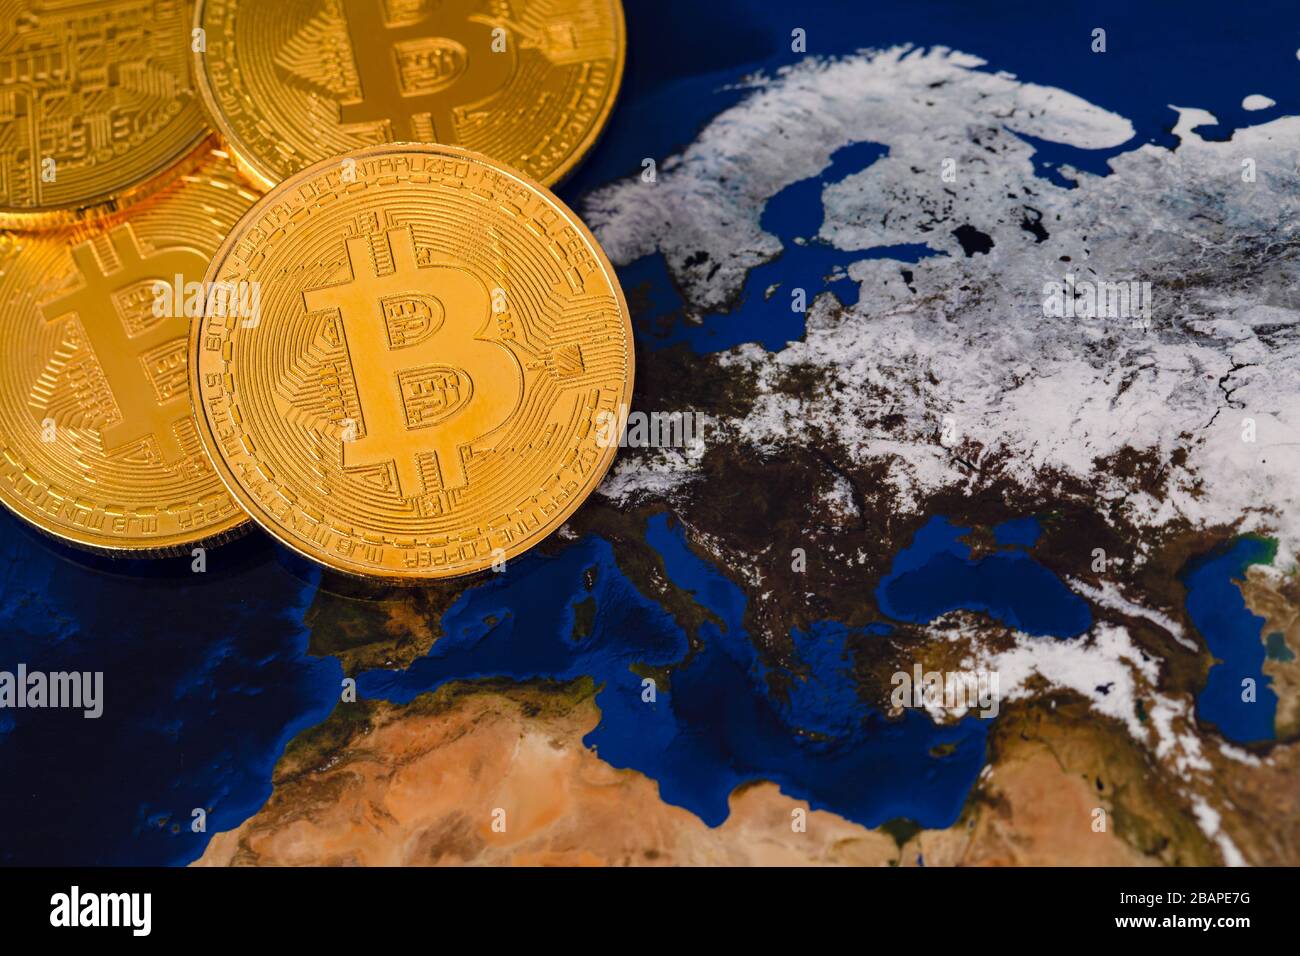 Golden Shiny Bitcoin Crypto Currency Coins On World Map Stock Photo